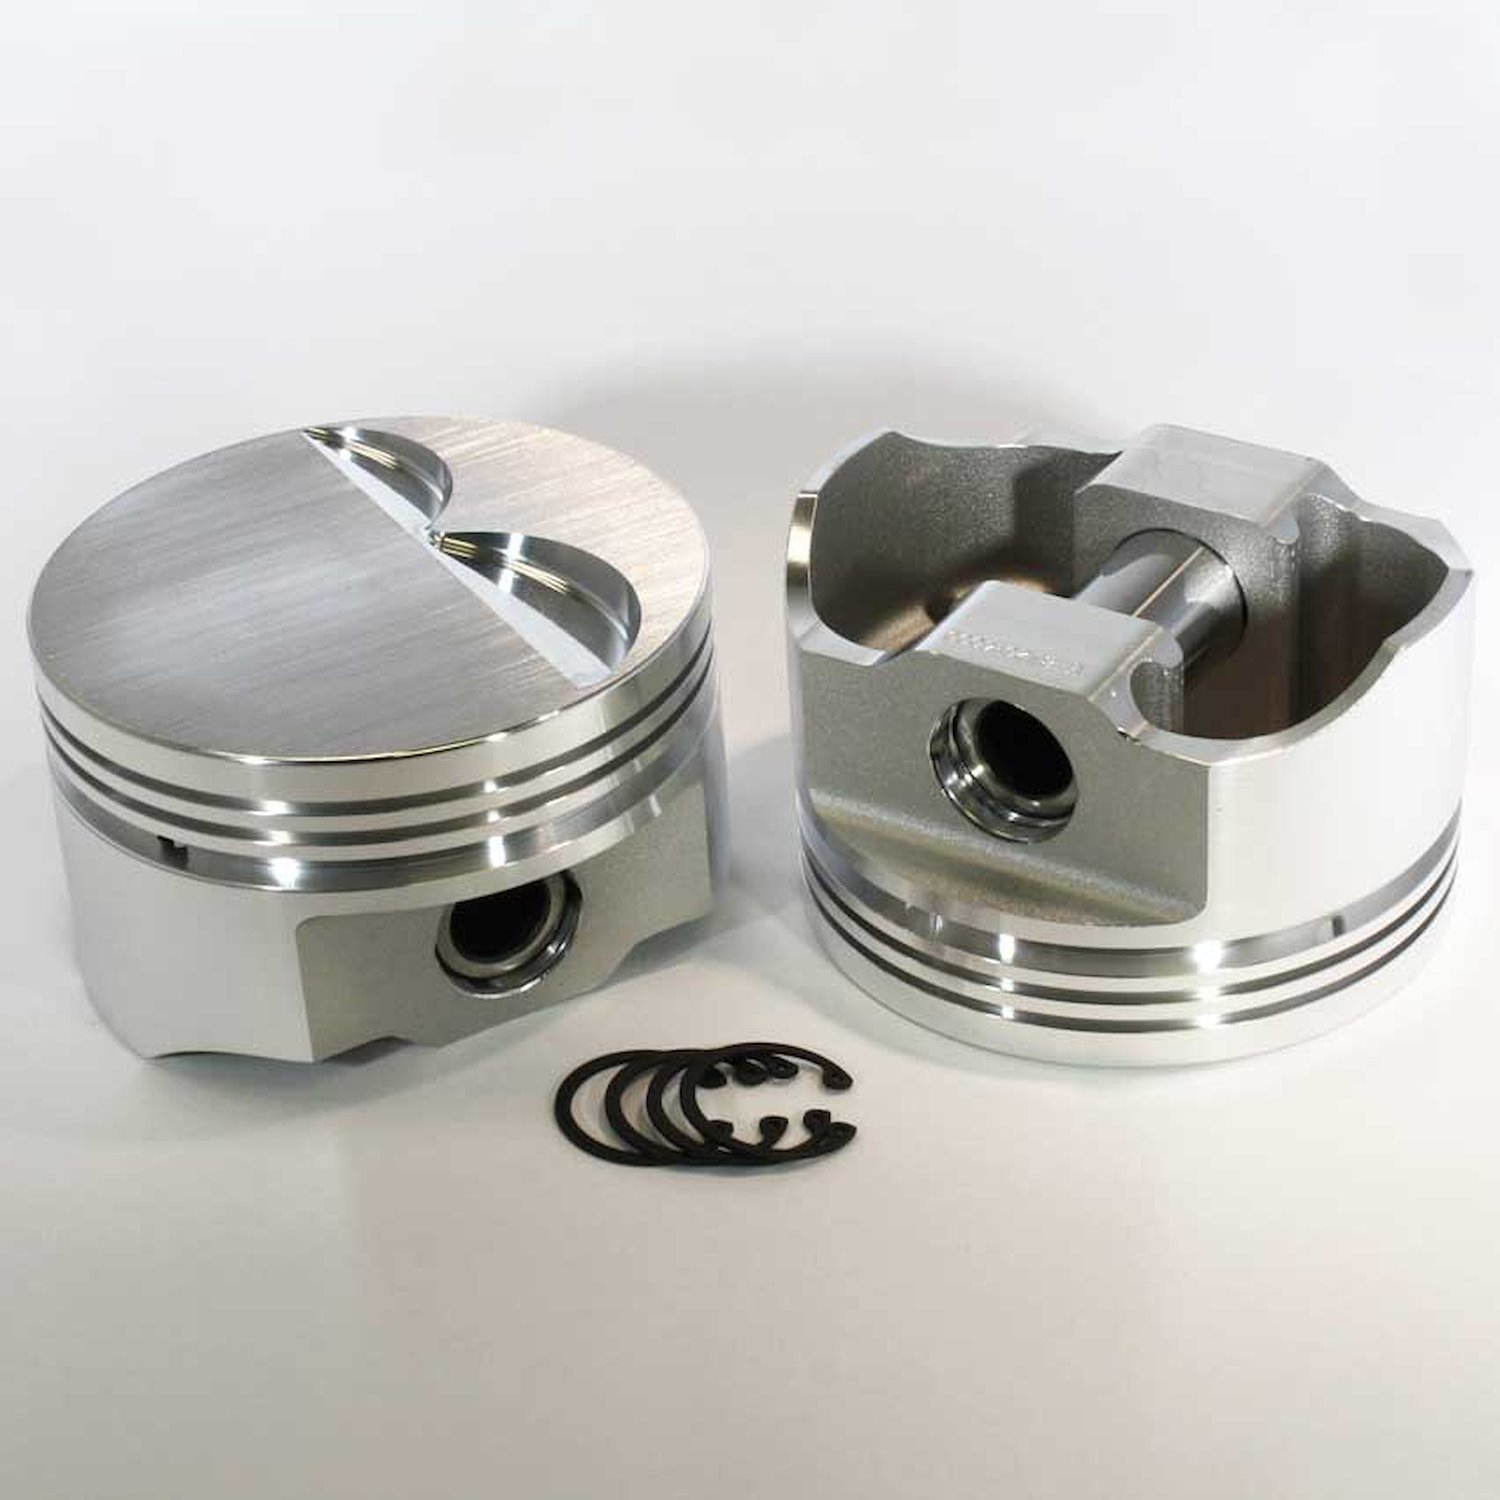 8775-4065 E-Series Flat Top Piston Set for 1999-2019 Chevy LS, 4.065 in. Bore, -3cc Volume [OEM Stroke]